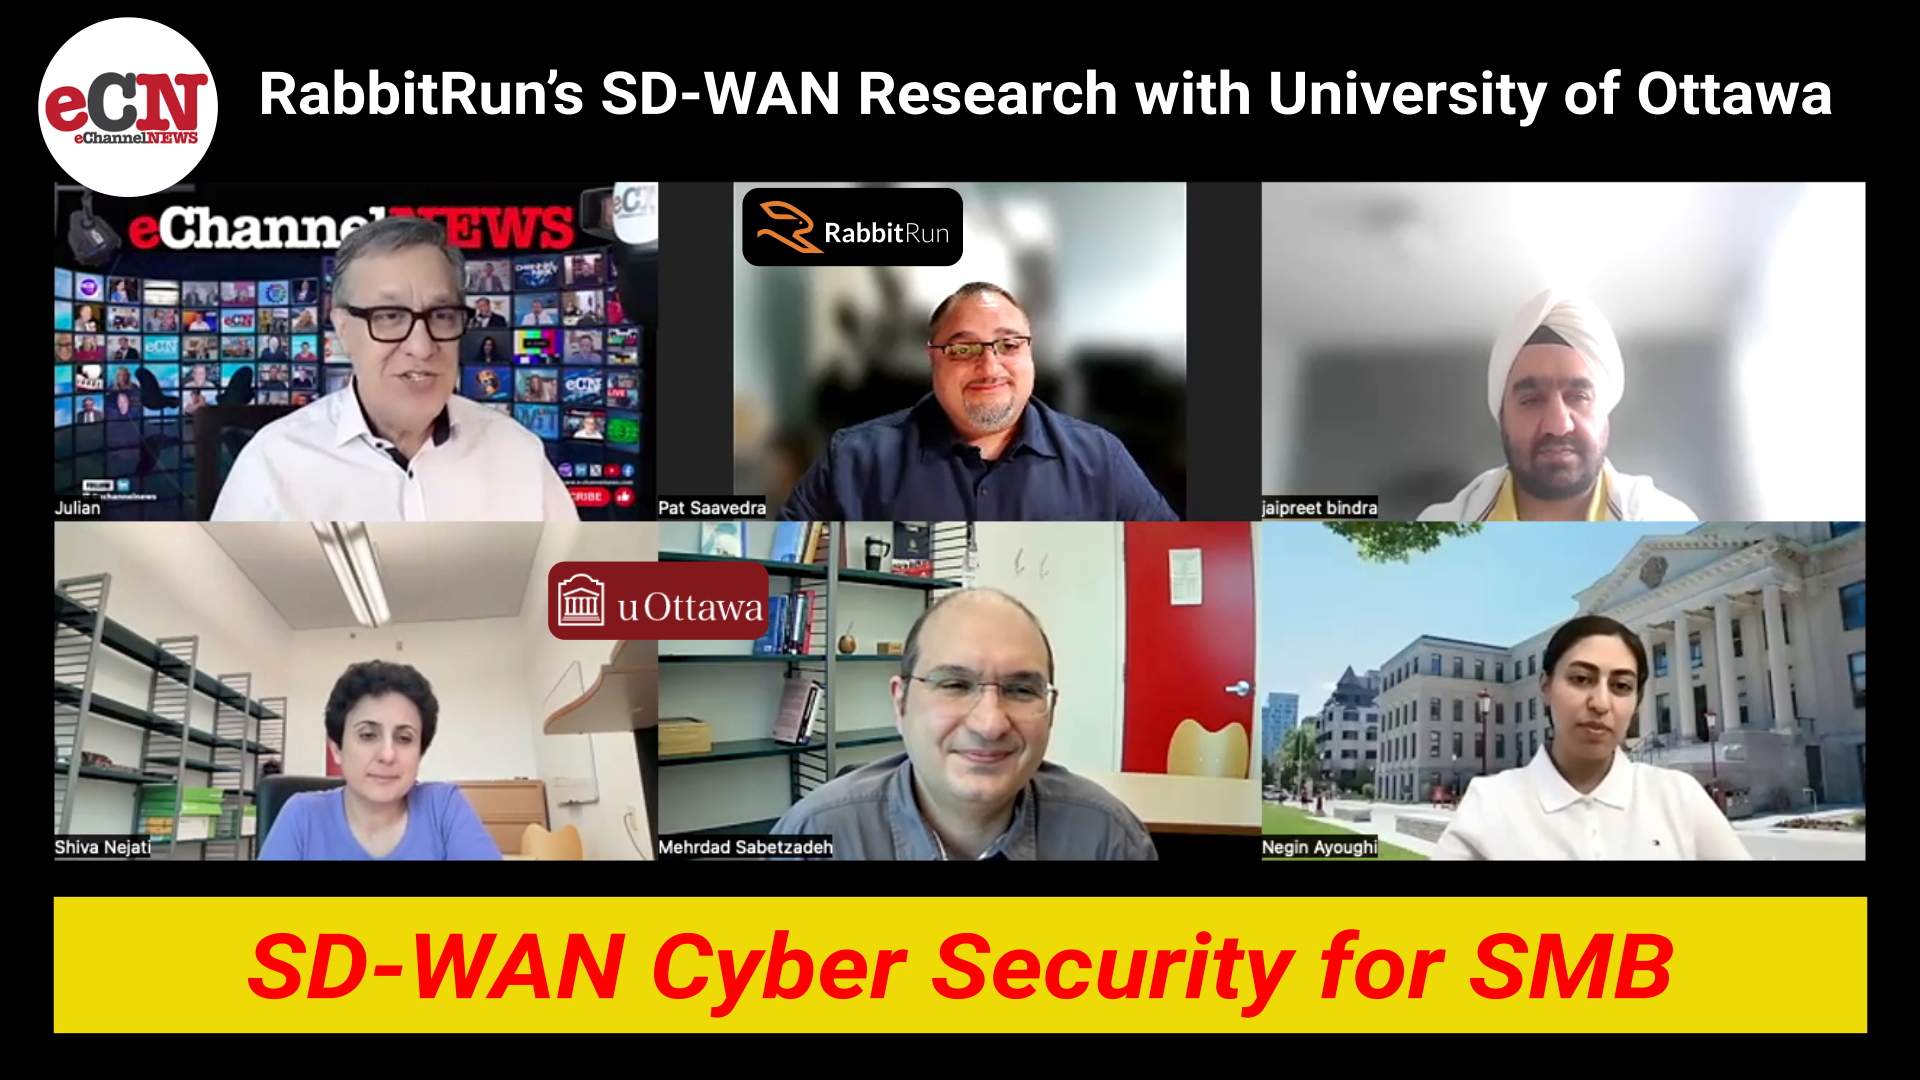 SD-WAN Cyber Security Research with University of Ottawa